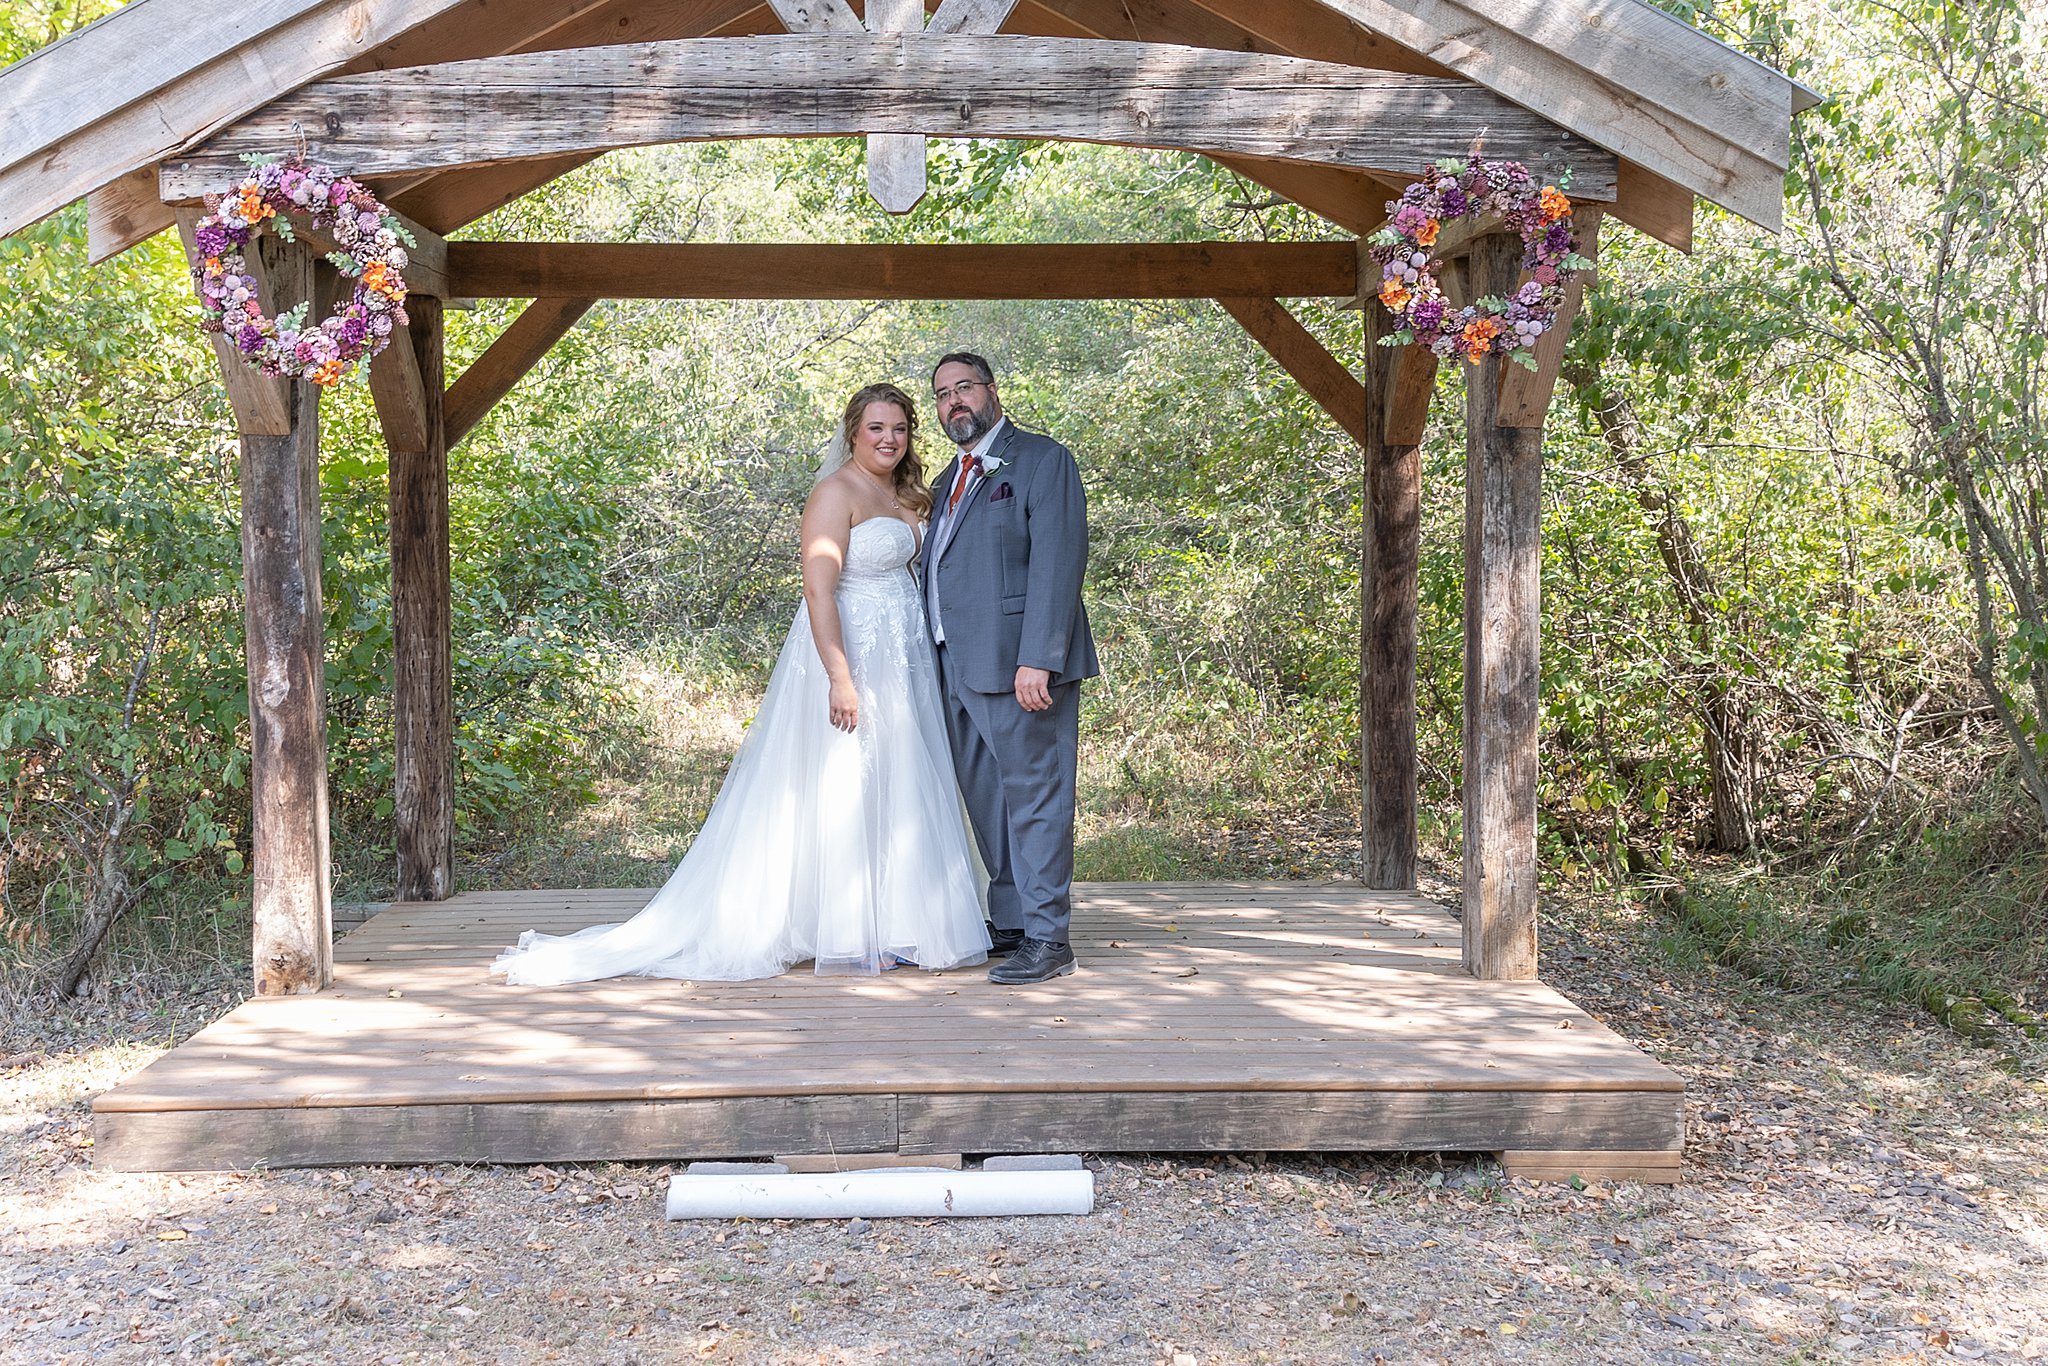 newlyweds stand in a wooden gazebo decorated with colorful wreathes